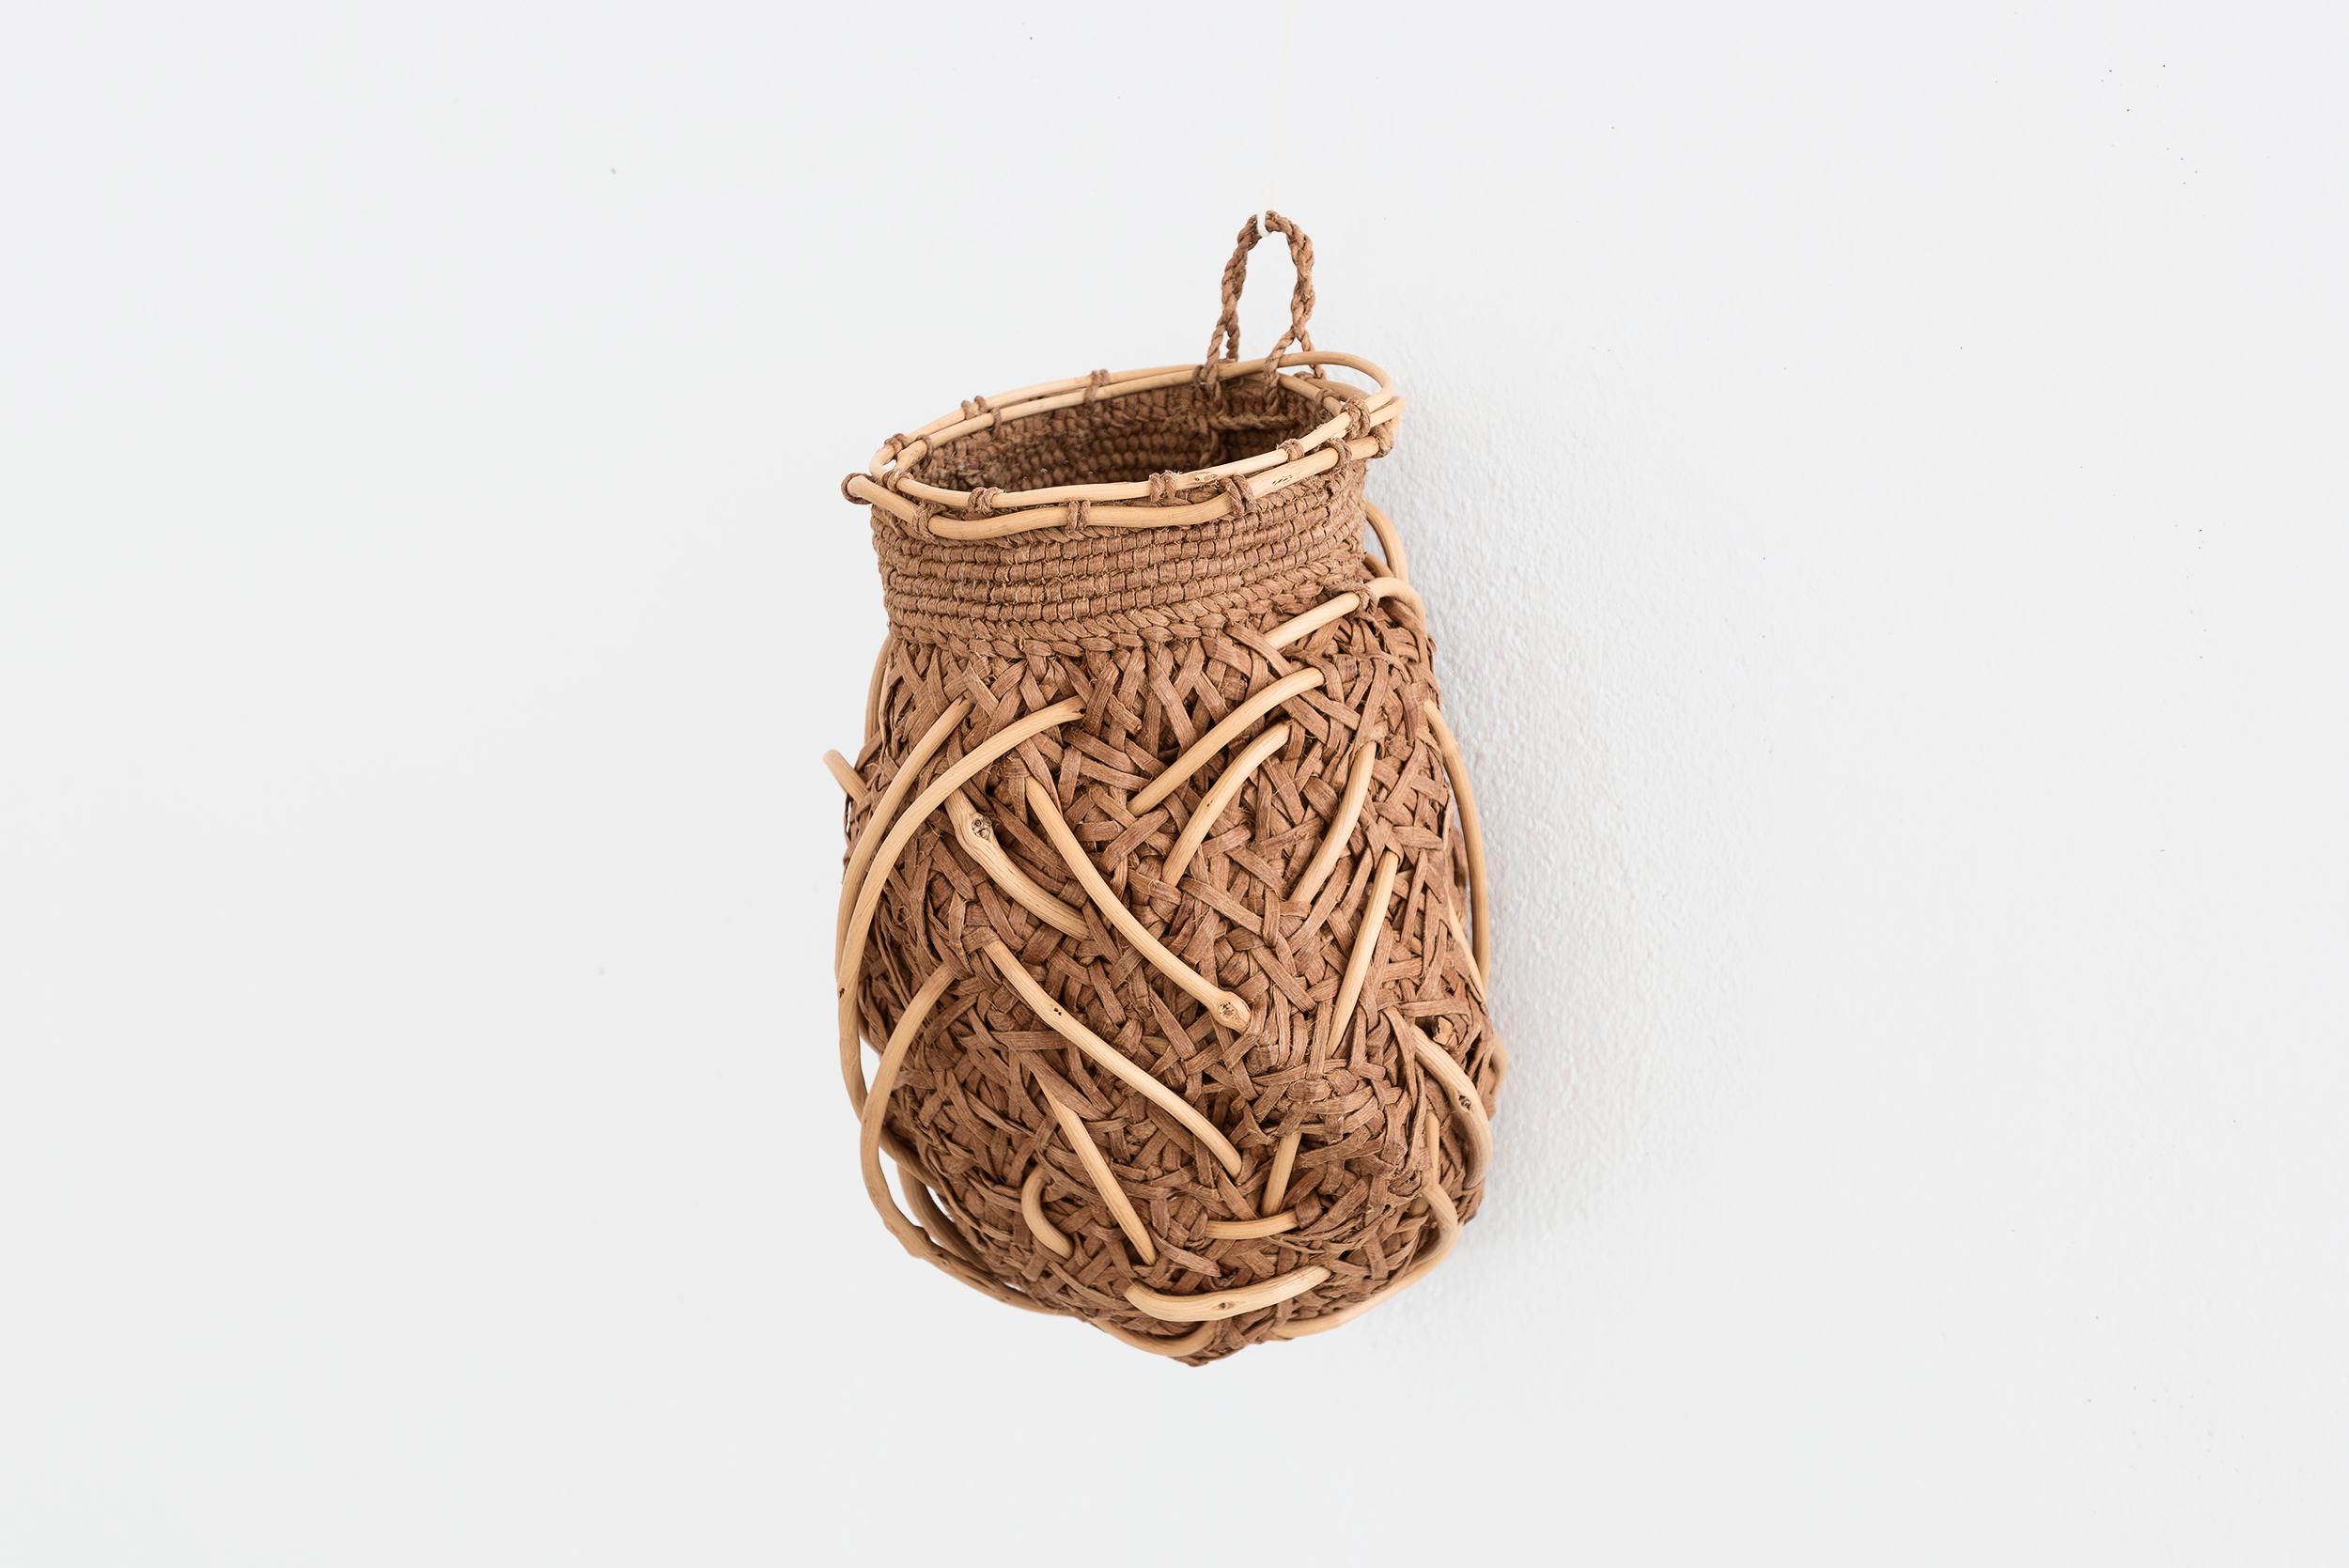 Jennifer Zurick
Manufactured by Jennifer Zurick
Produced in exclusive for SIDE GALLERY
Kentucky (USA), 2019

Nesting instinct
Willow bark, honey suckle vine
Measurements: 13 cm x 13 cm x 20 H cm

Jennifer Zurick is a self-taught artist